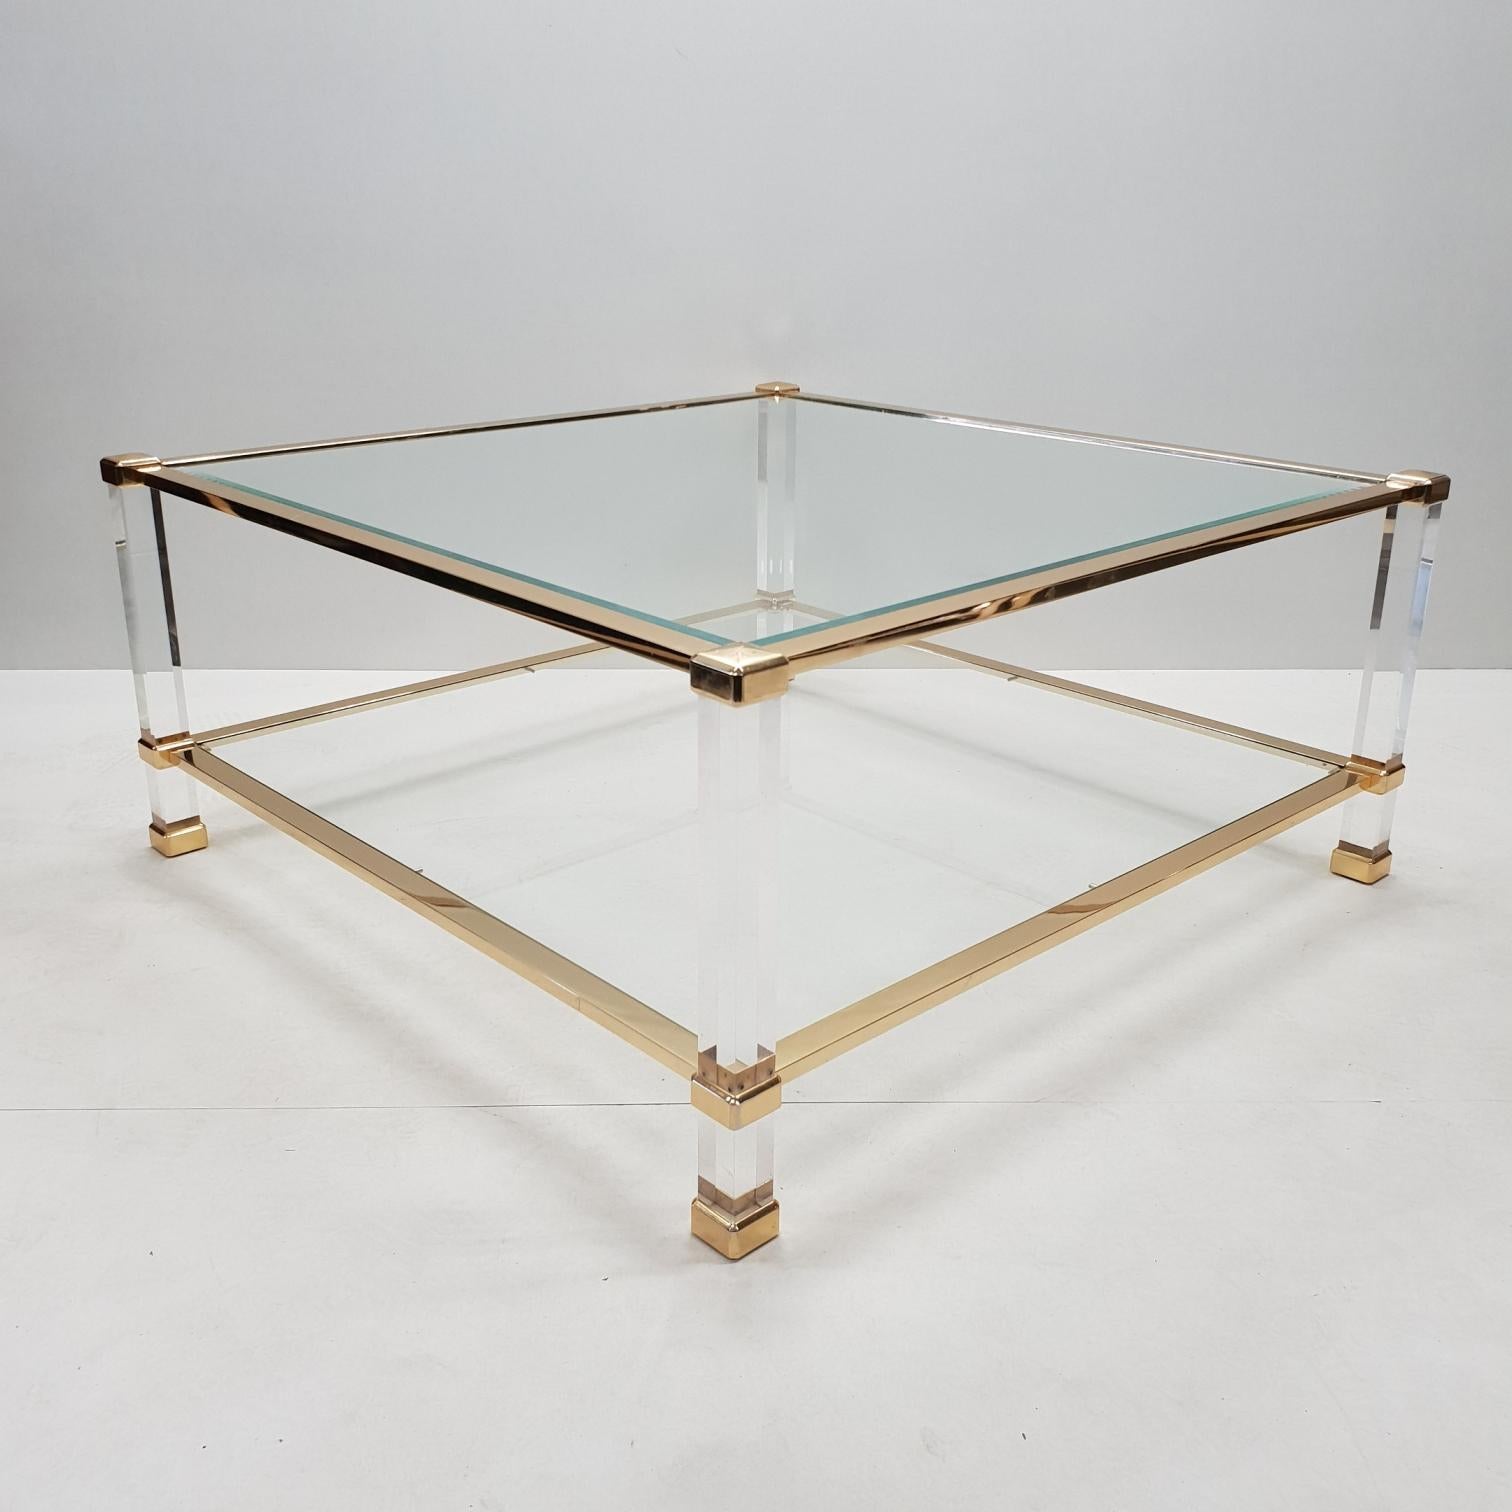 Hollywood Regency Italian Lucite and Brass Square Coffee Table by Orsenigo, 1970s For Sale